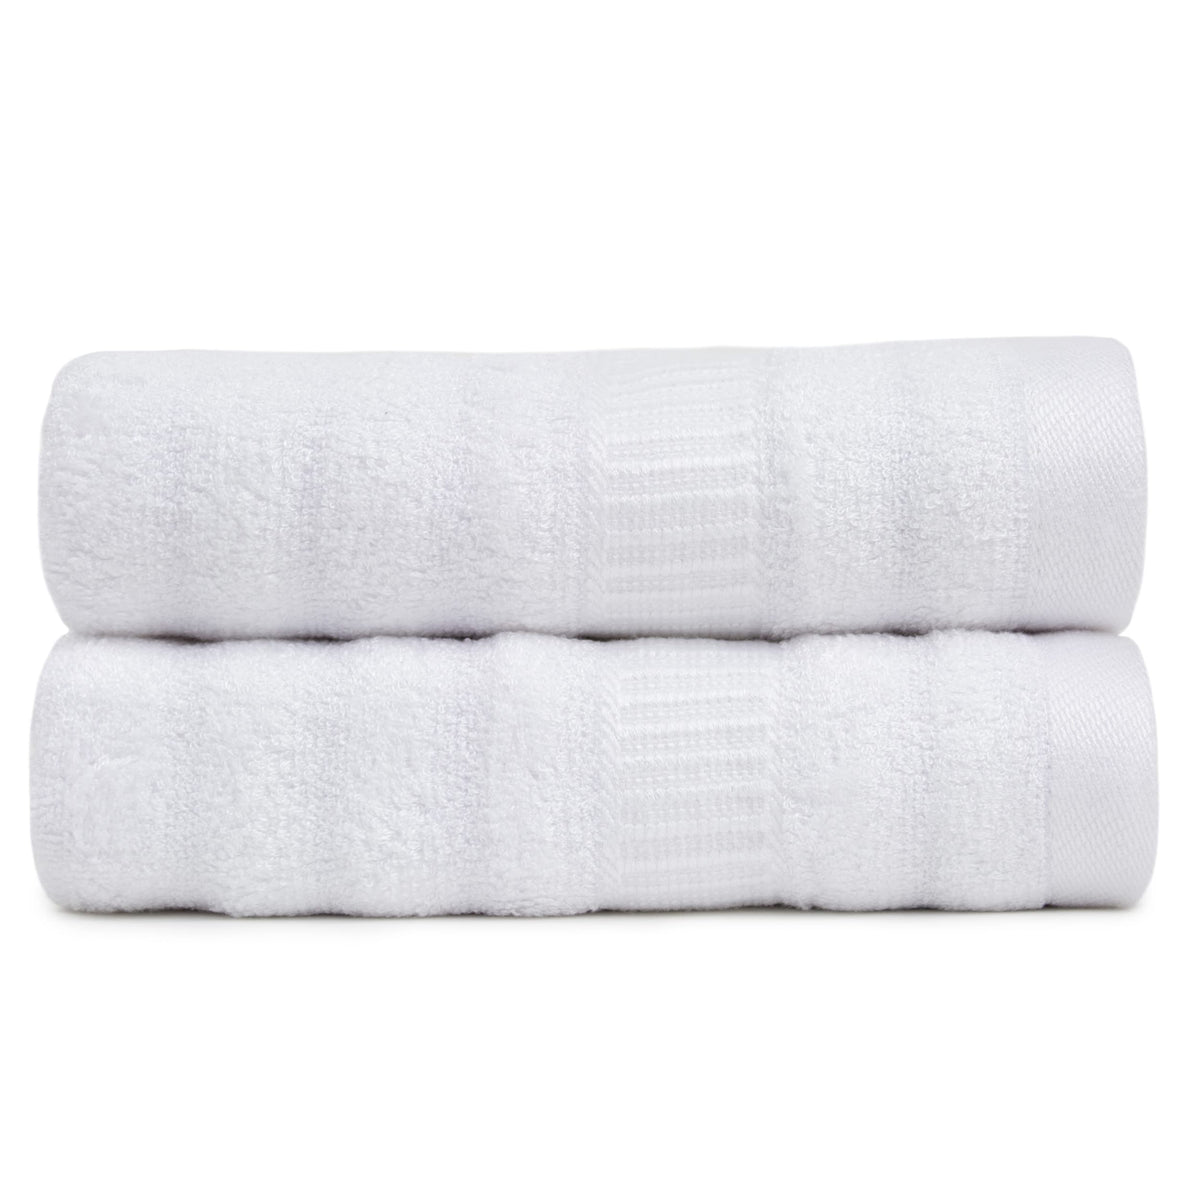 Mush Bamboo Hand Towel Set of 2 | 100% Bamboo | Ultra Soft, Absorbent & Quick Dry Towel for Daily use. Gym, Pool, Travel, Sports and Yoga | 75 X 35 cms | 600 GSM (Silk White)